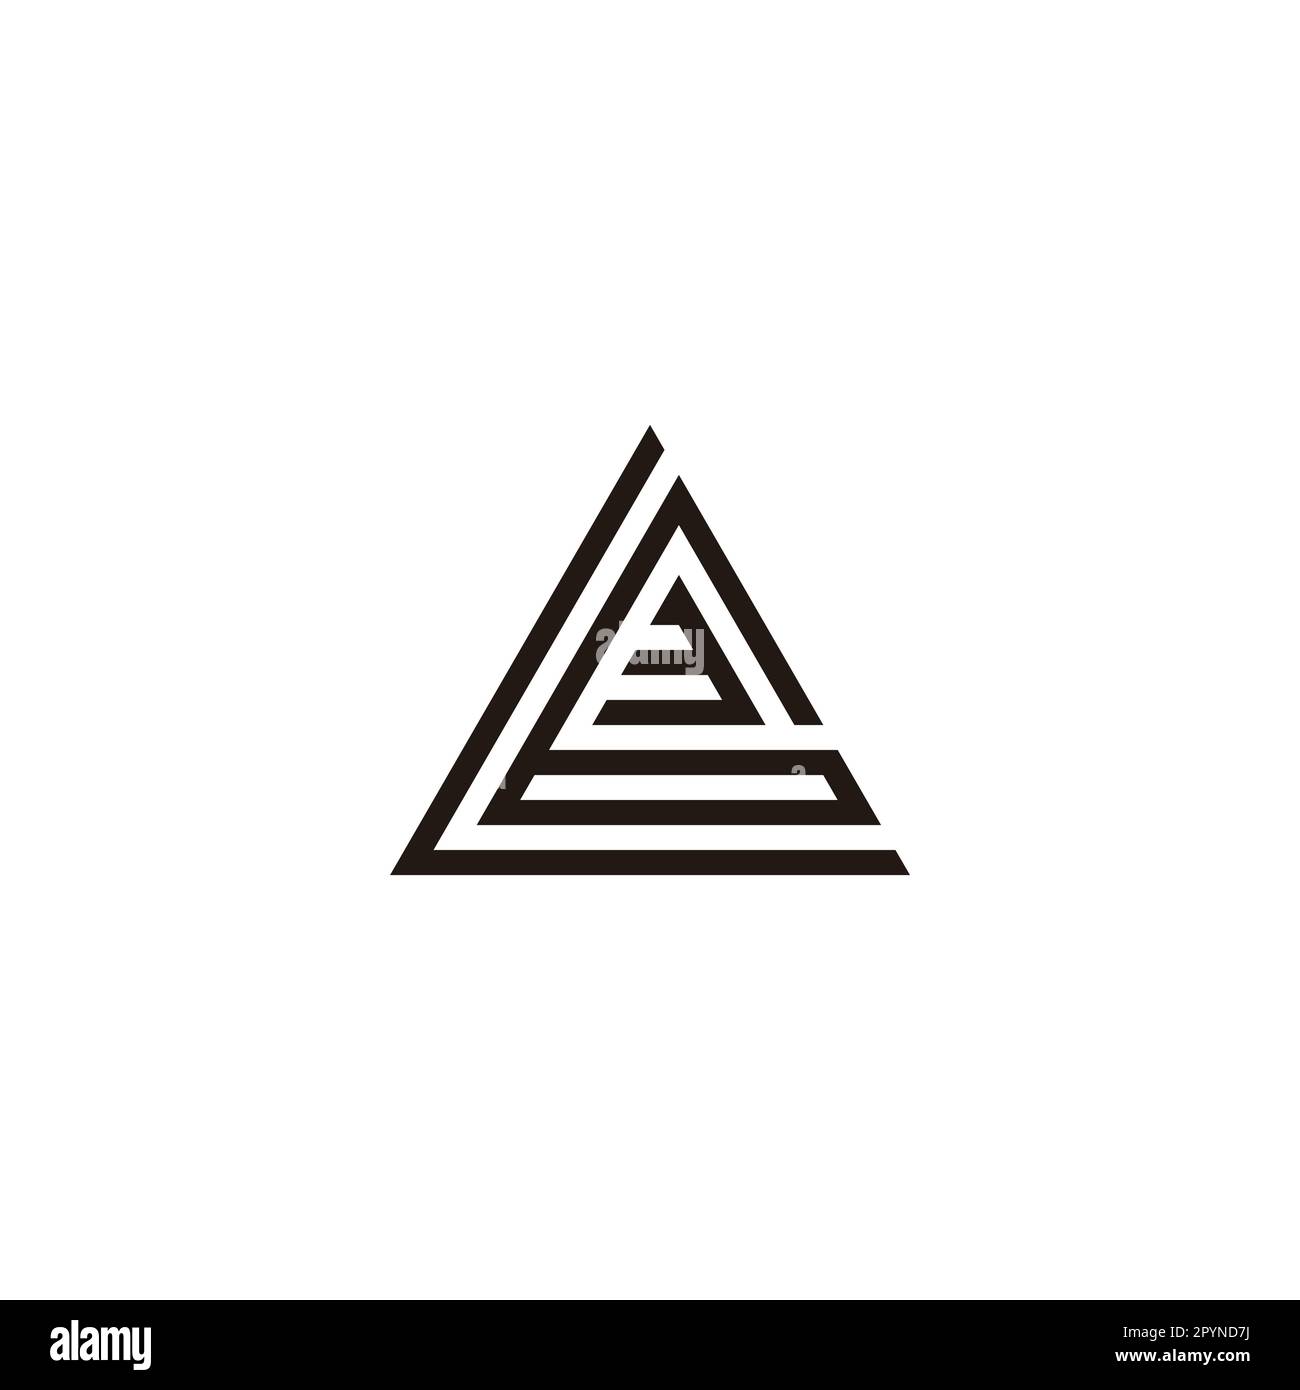 Letter L, number 3 and 6 triangle geometric symbol simple logo vector ...